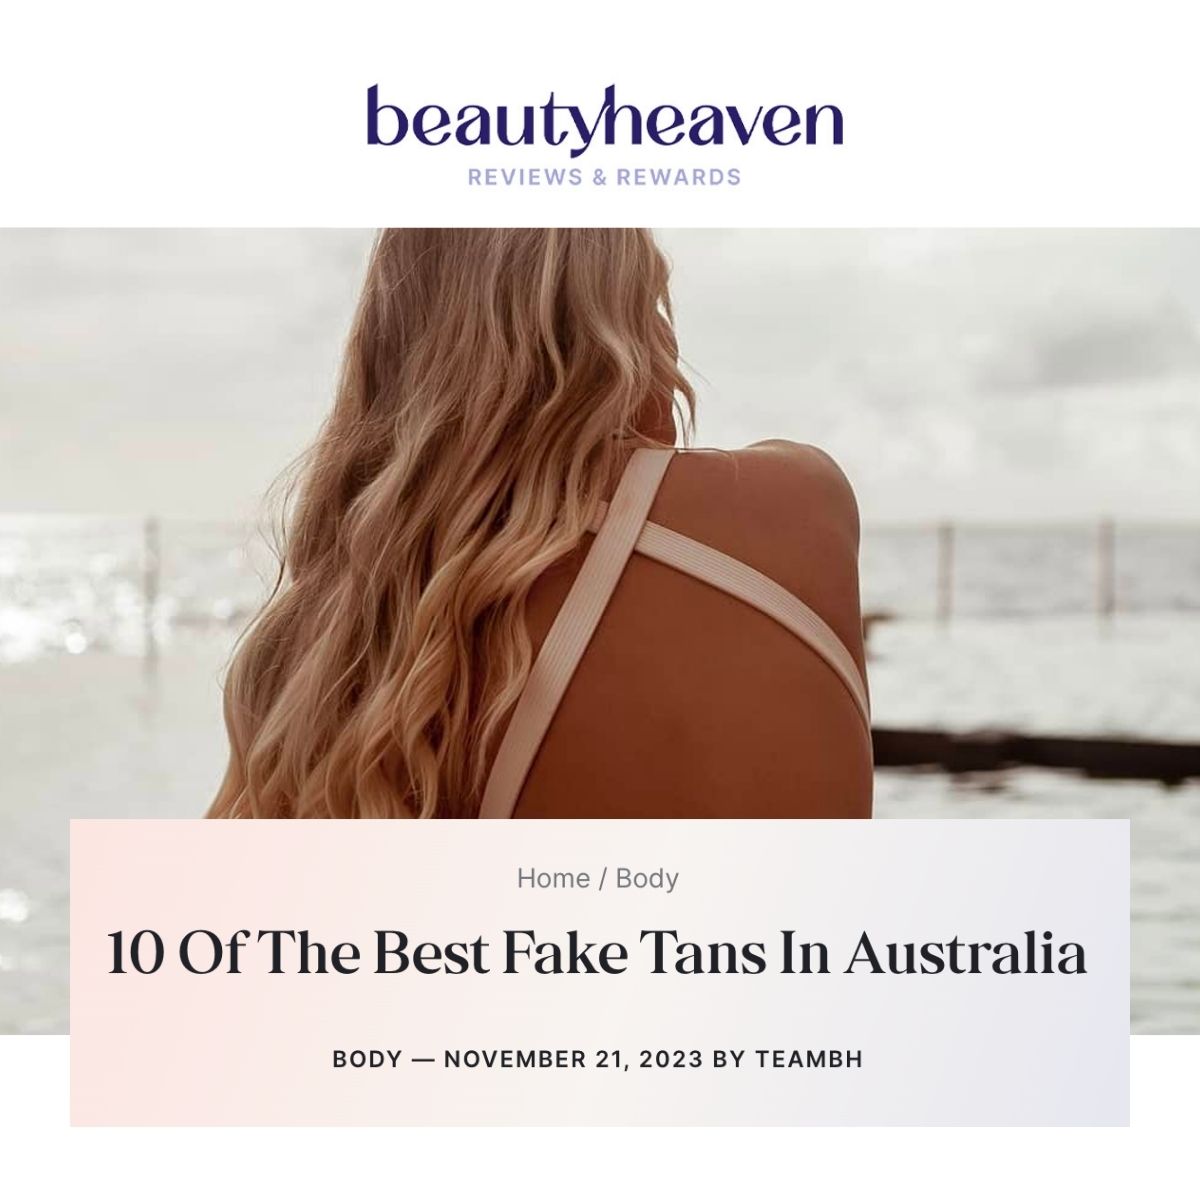 10 Of The Best Fake Tans In Australia